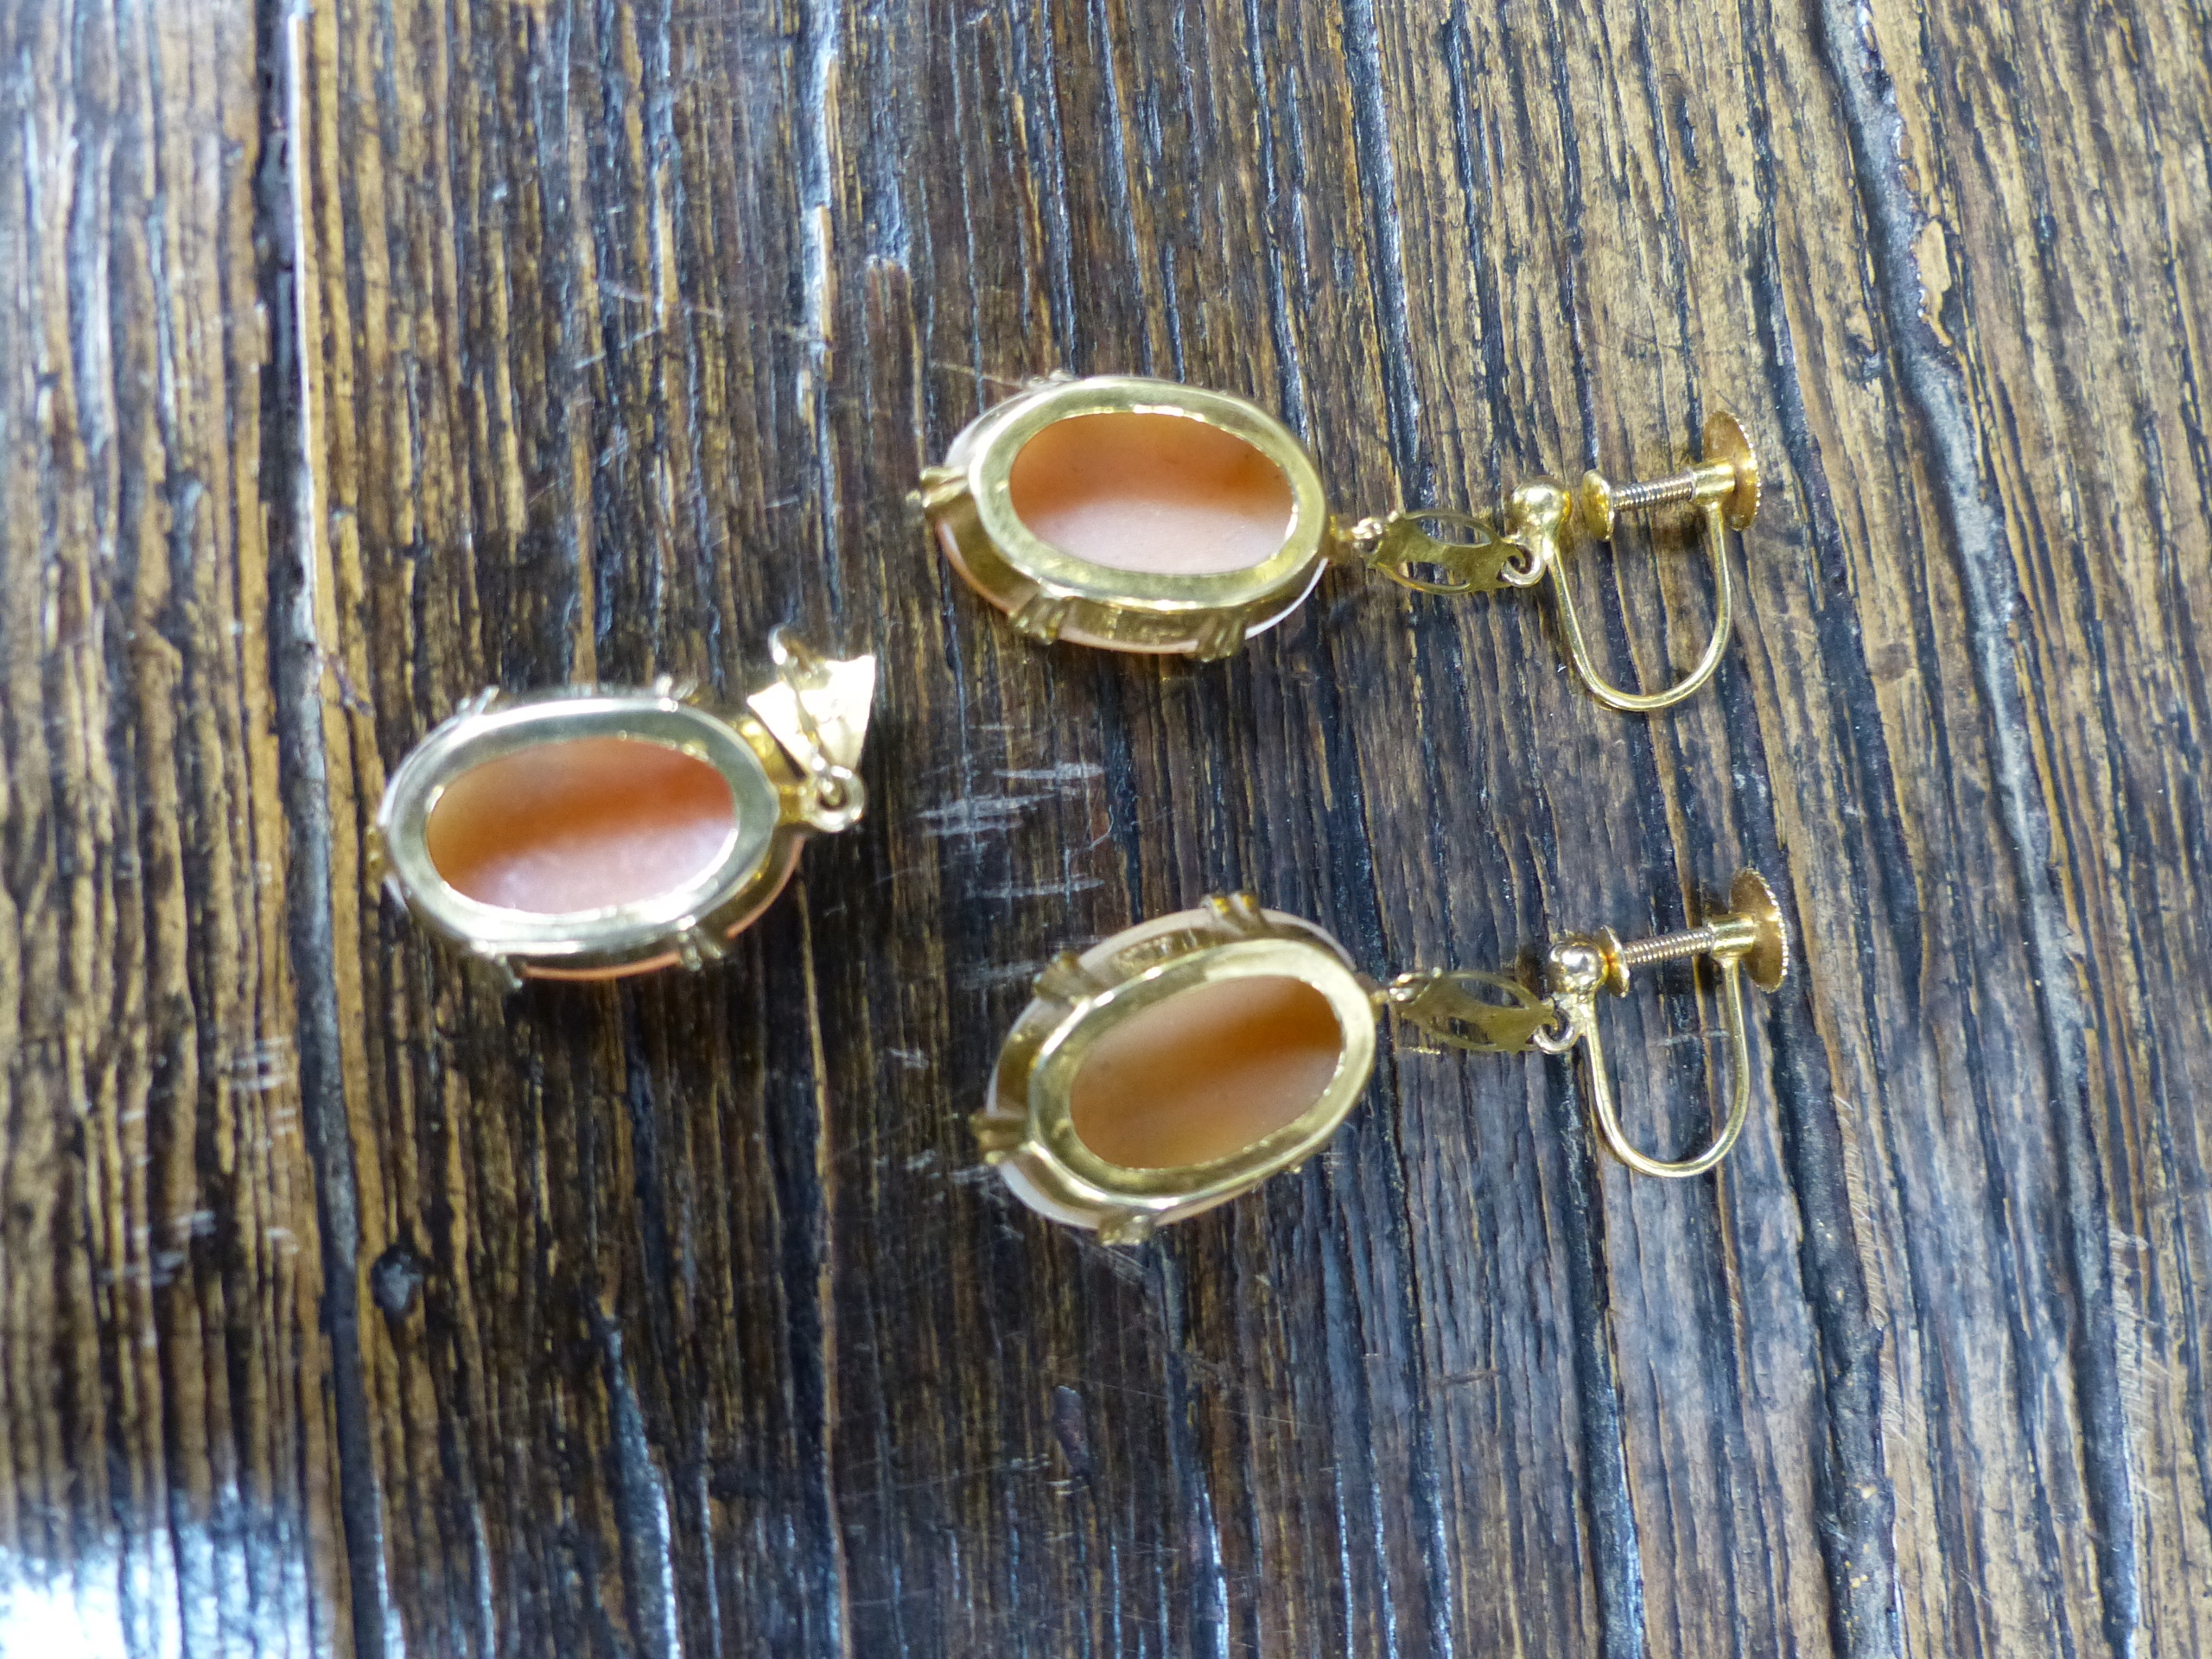 A PAIR OF 9ct GOLD SCREW BACK DROP CAMEO PORTRAIT EARRINGS, HALLMARKED CHESTER 1954, MAKERS MARK WJP - Image 7 of 14